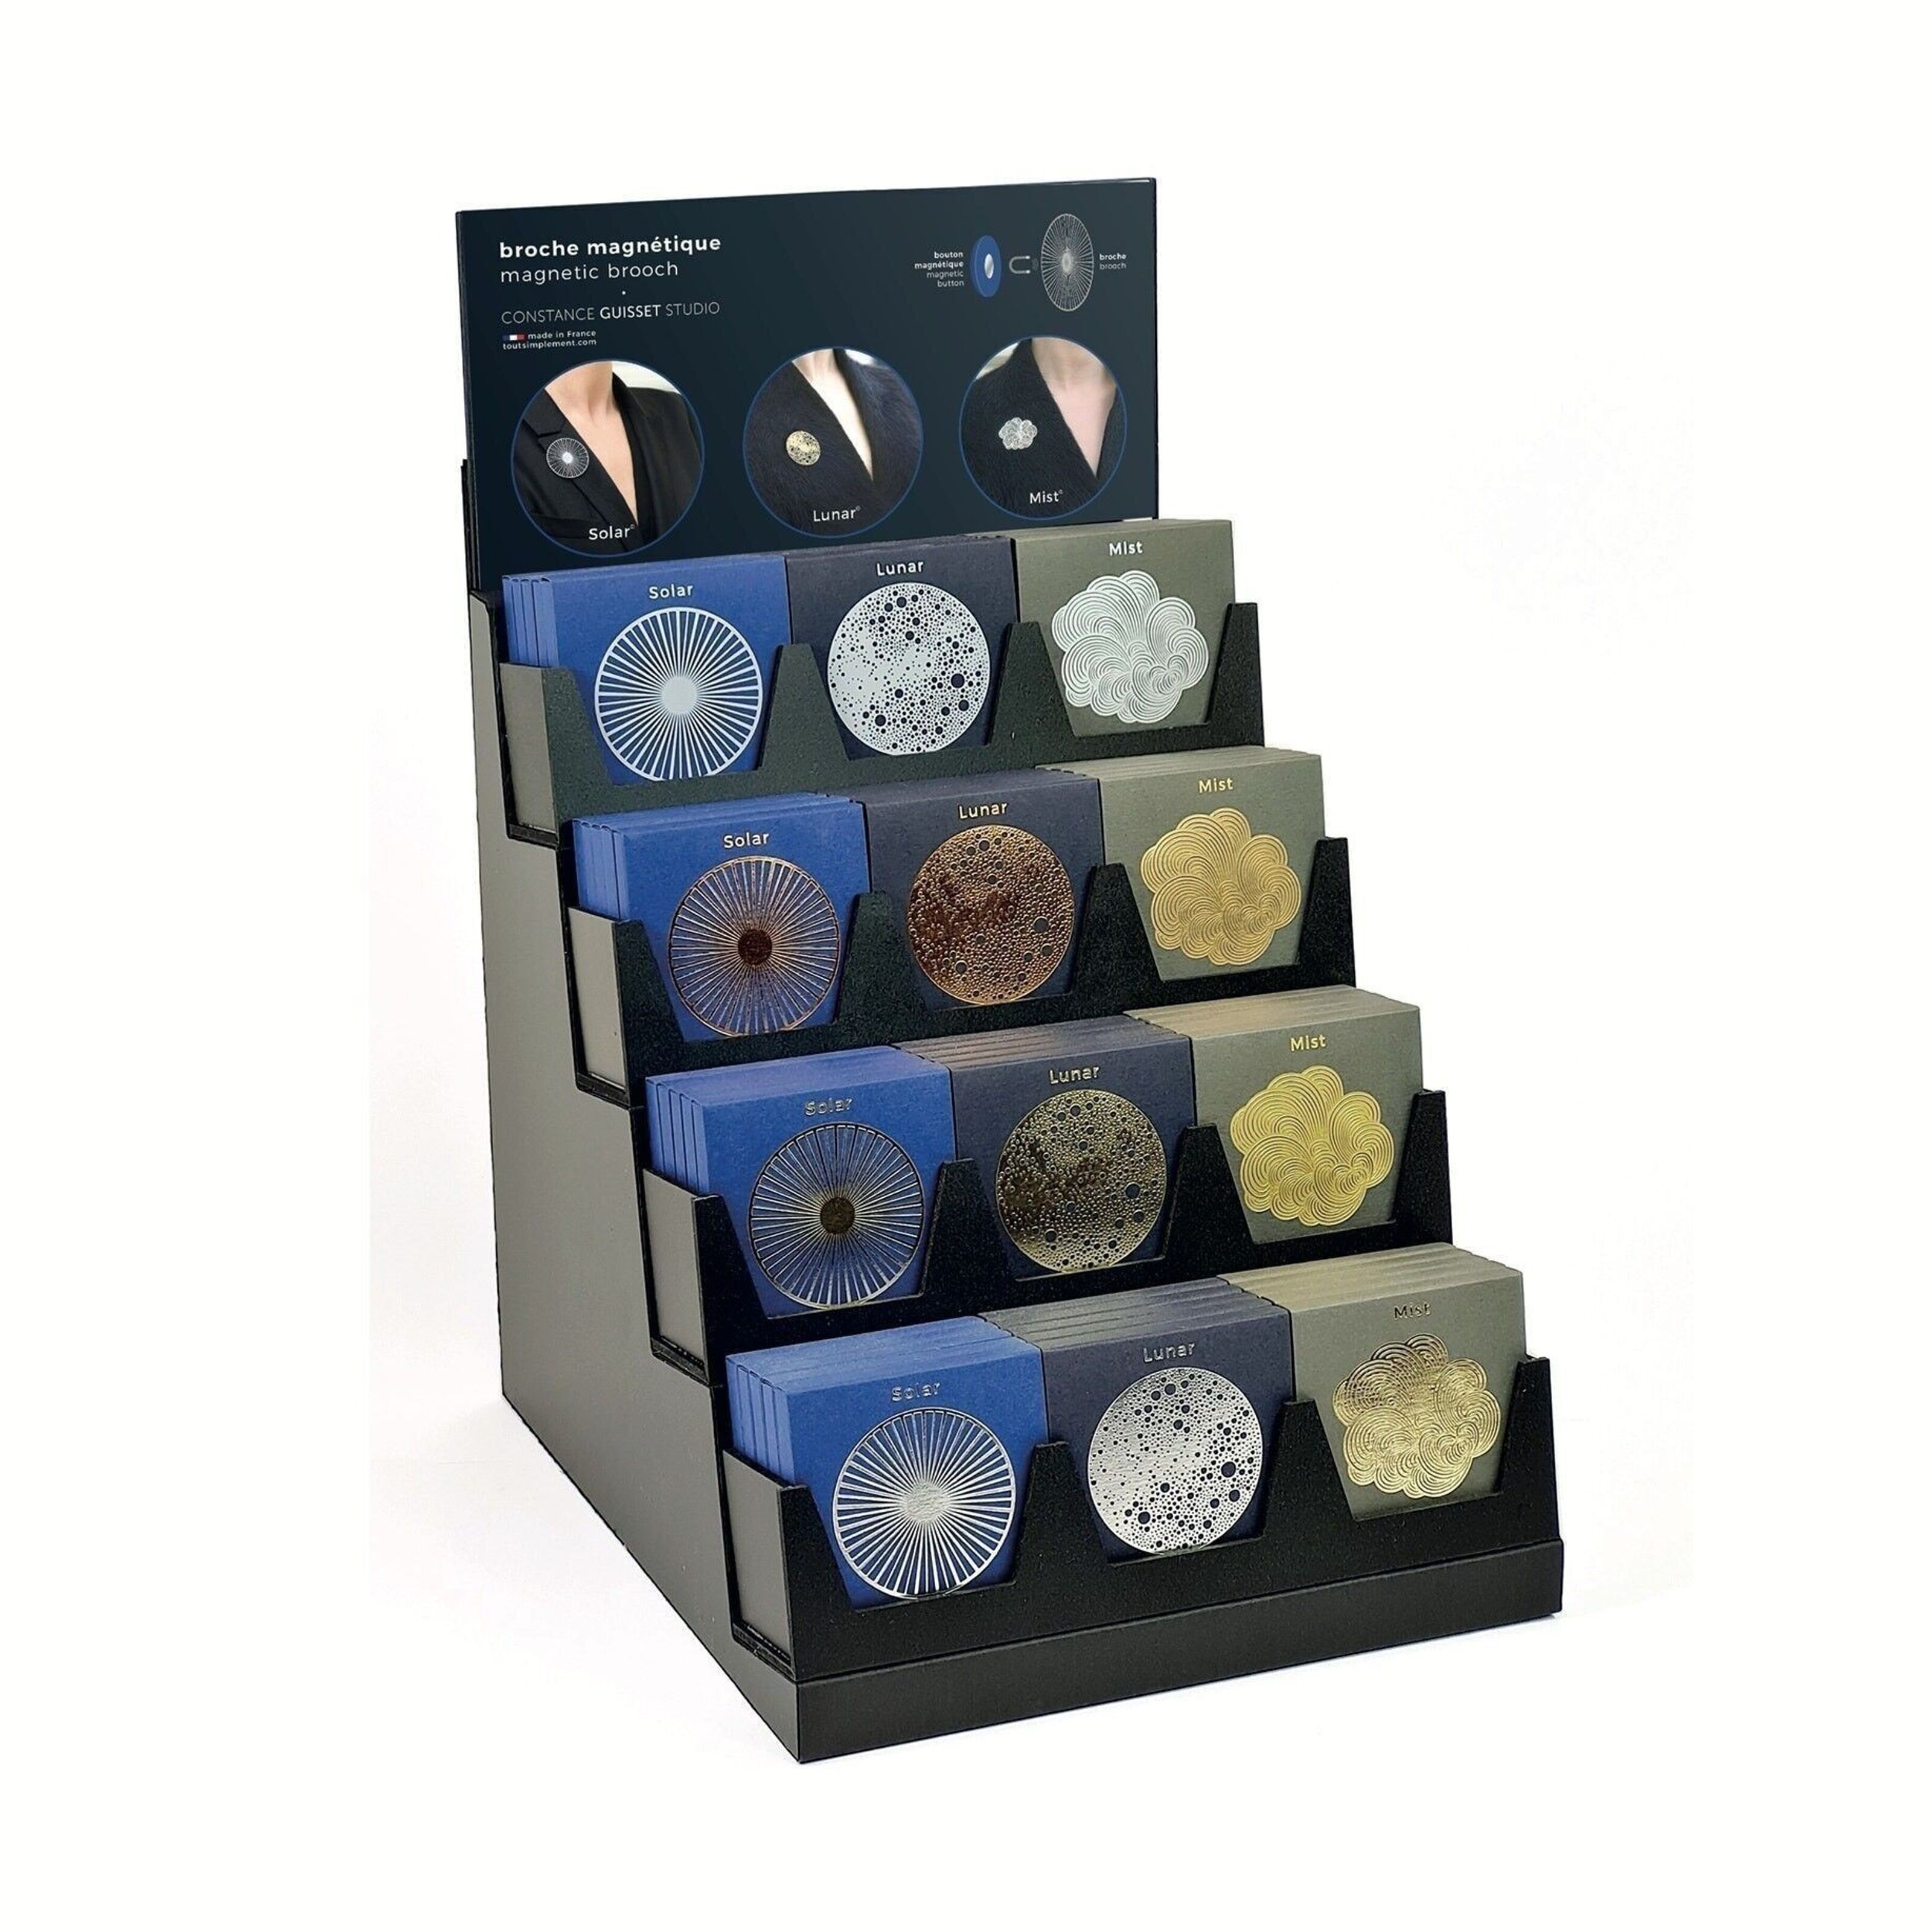 Buy wholesale Display full of 48 Small Solar Lunar Mist magnetic brooches  + free display - Design Constance Guisset